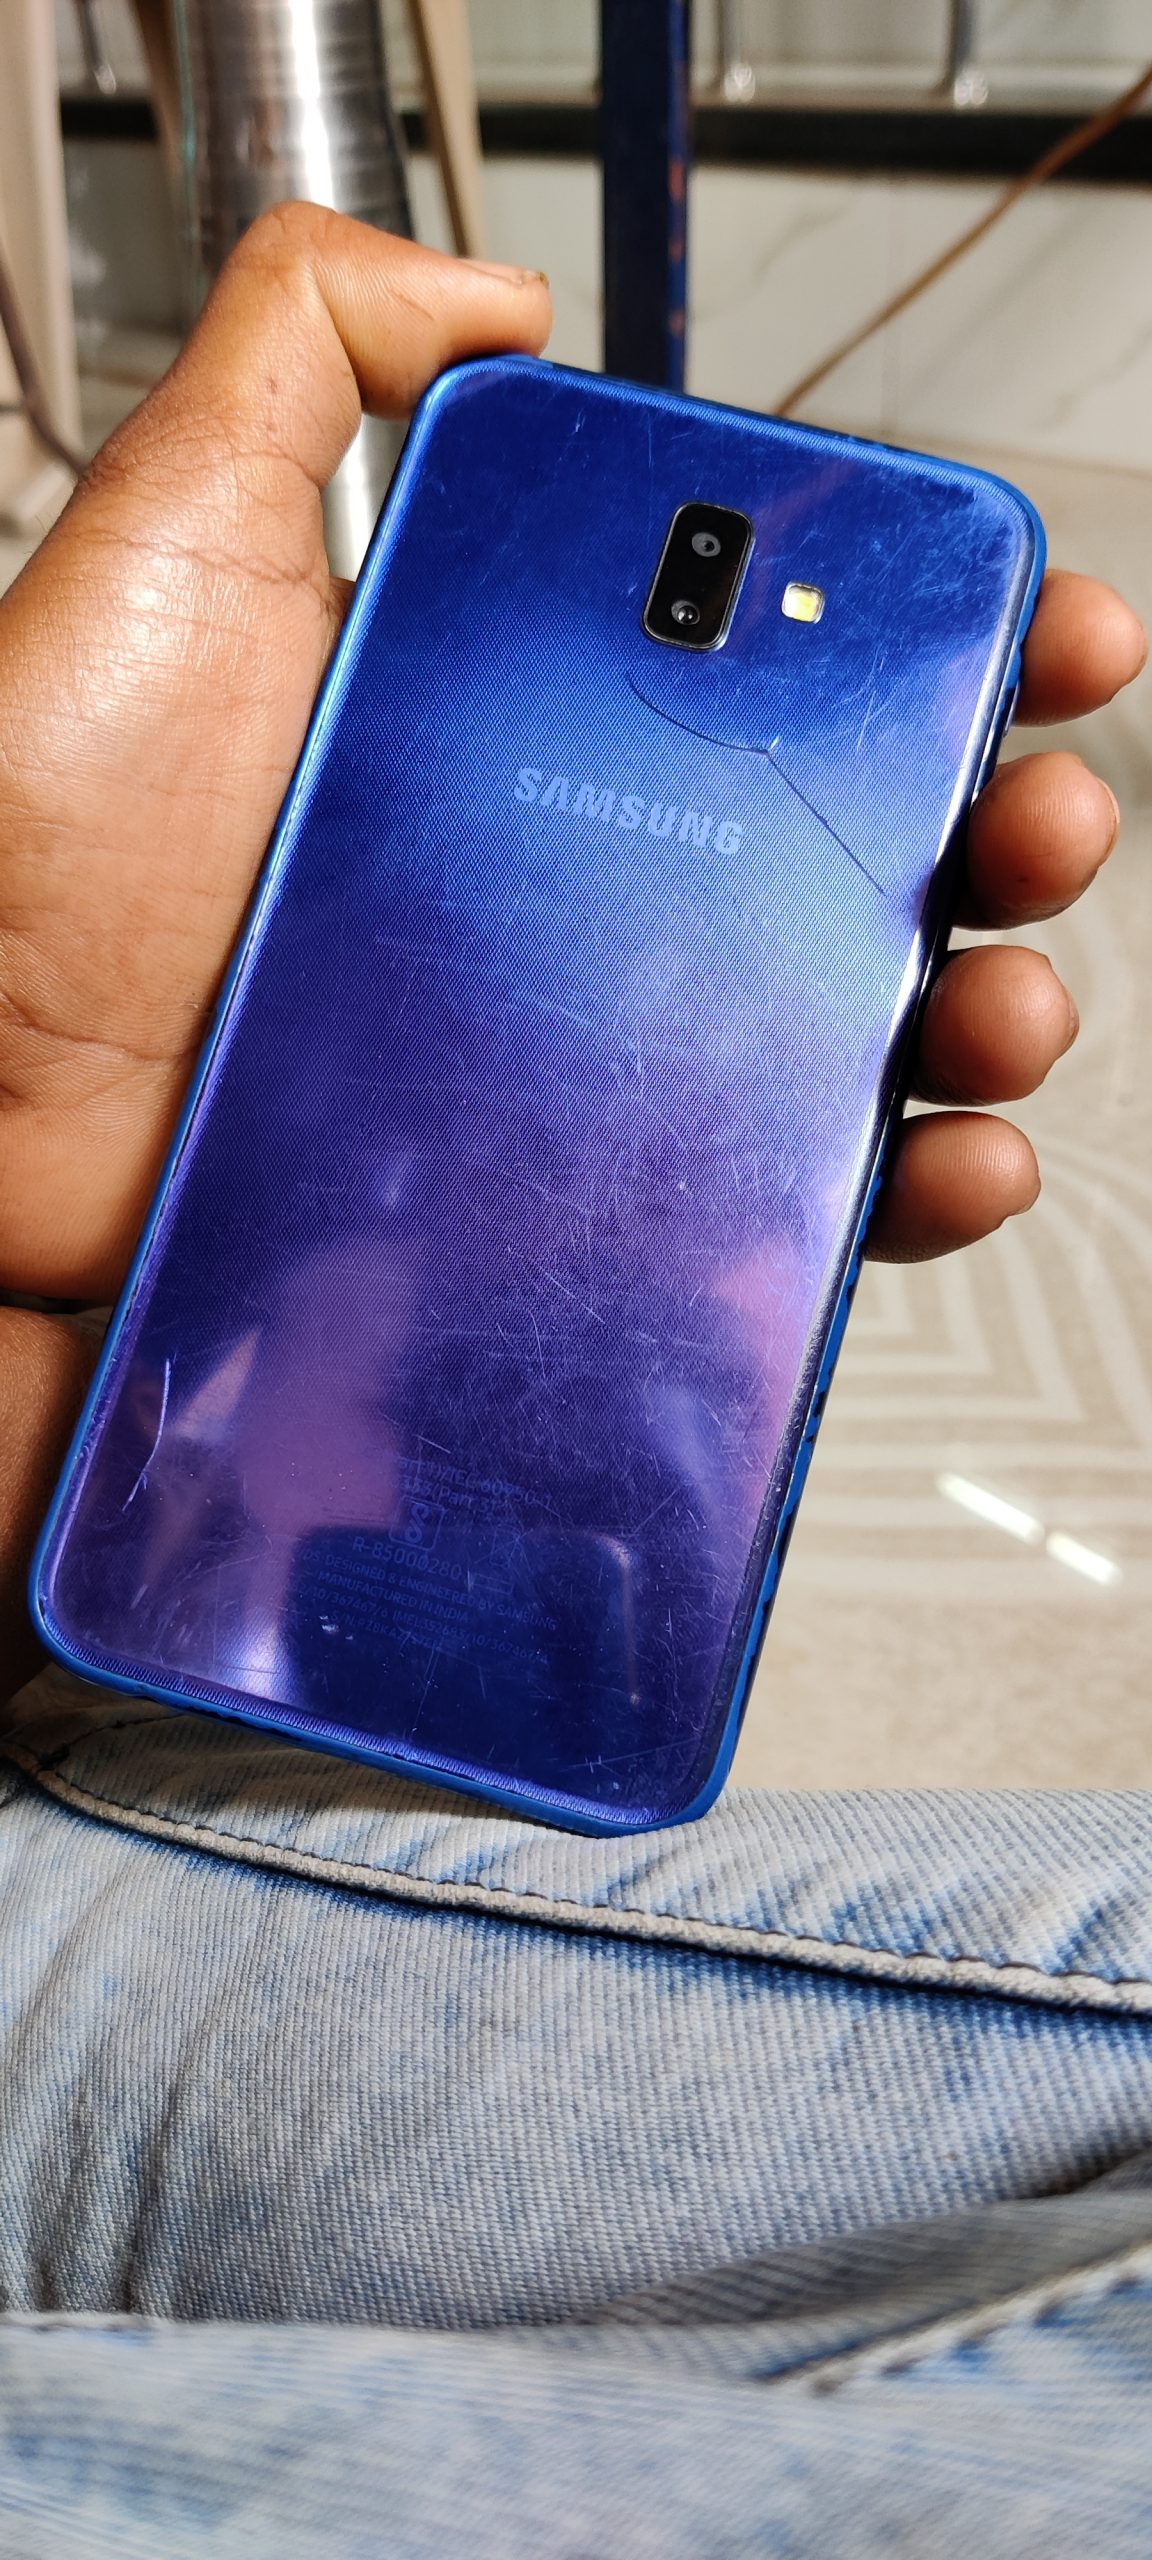 A Samsung mobile phone in hand